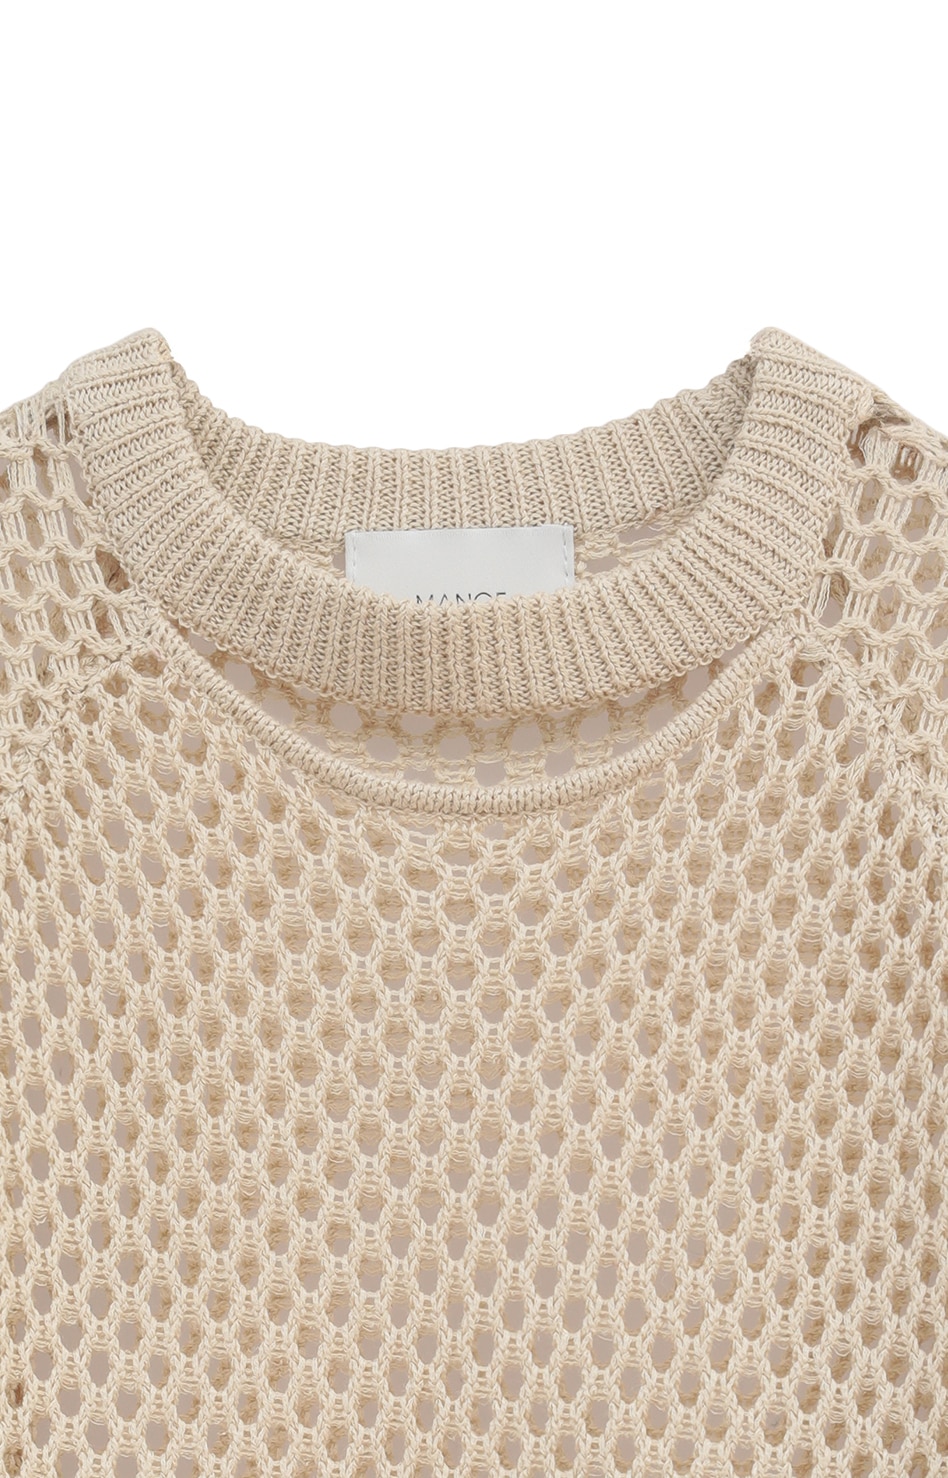 MESH KNIT TOPS｜TOPS(トップス)｜CLANE OFFICIAL ONLINE STORE